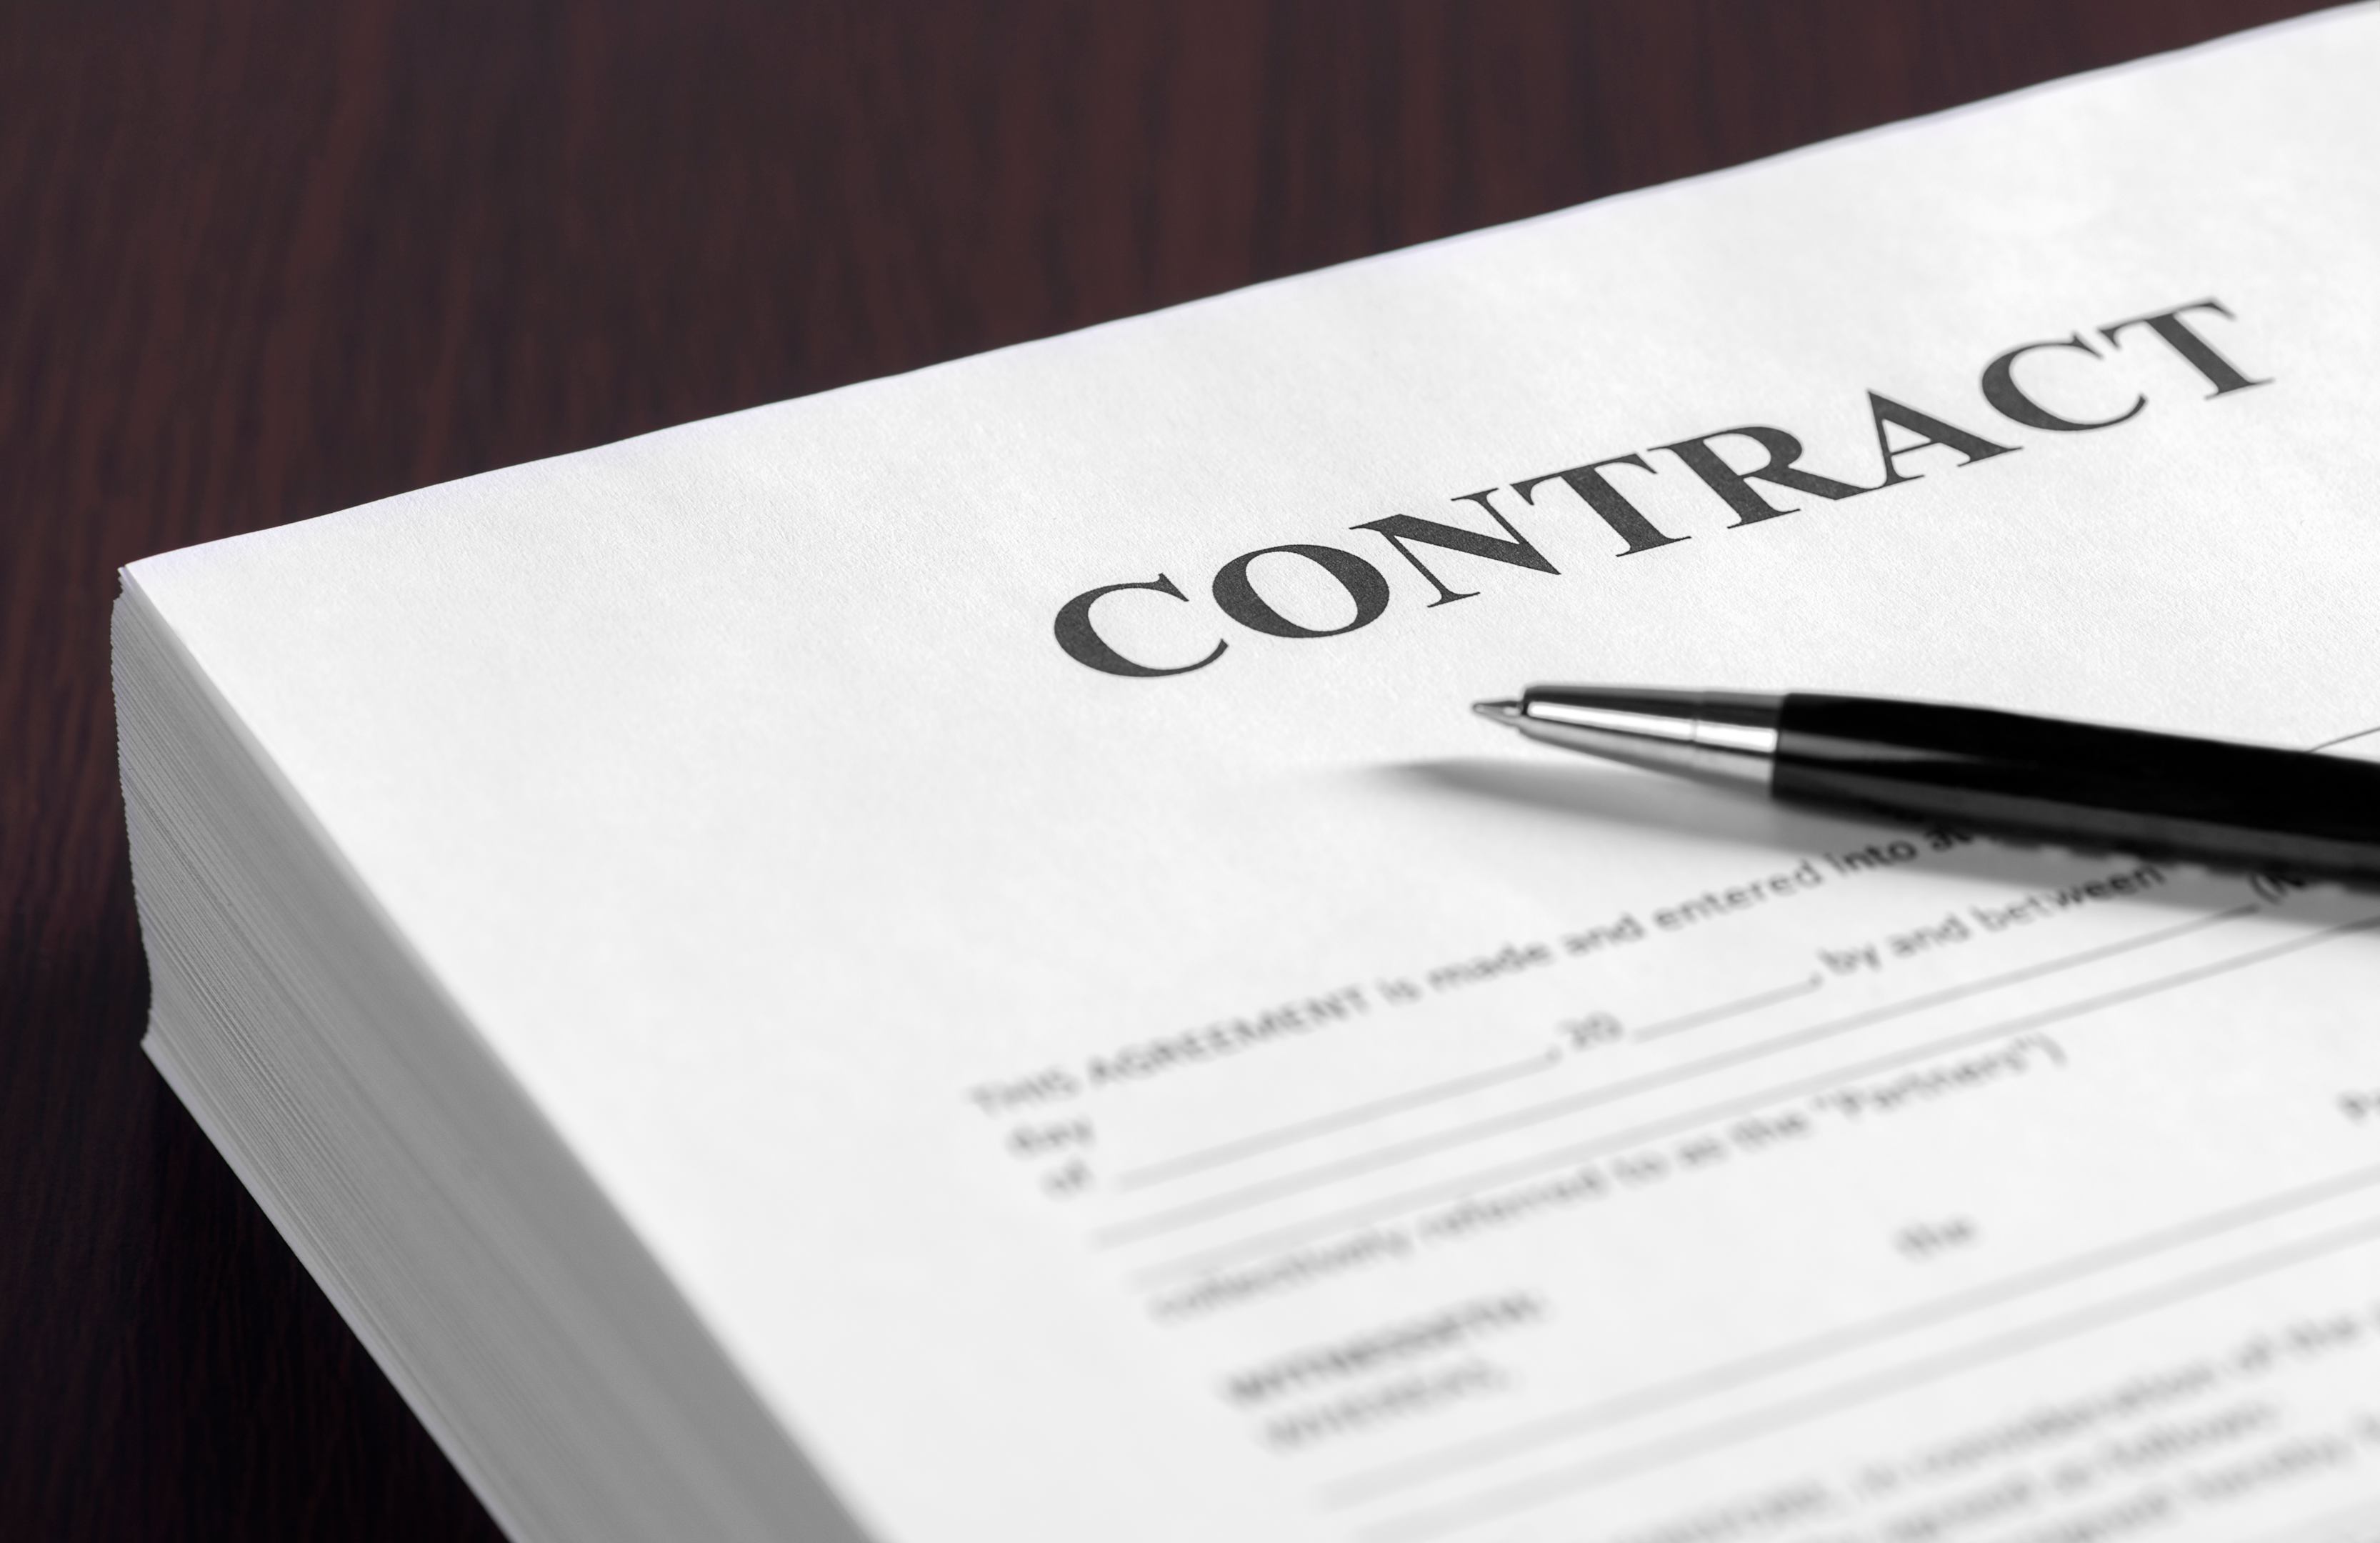 "In focus and within reach: the importance of accessible contracts."